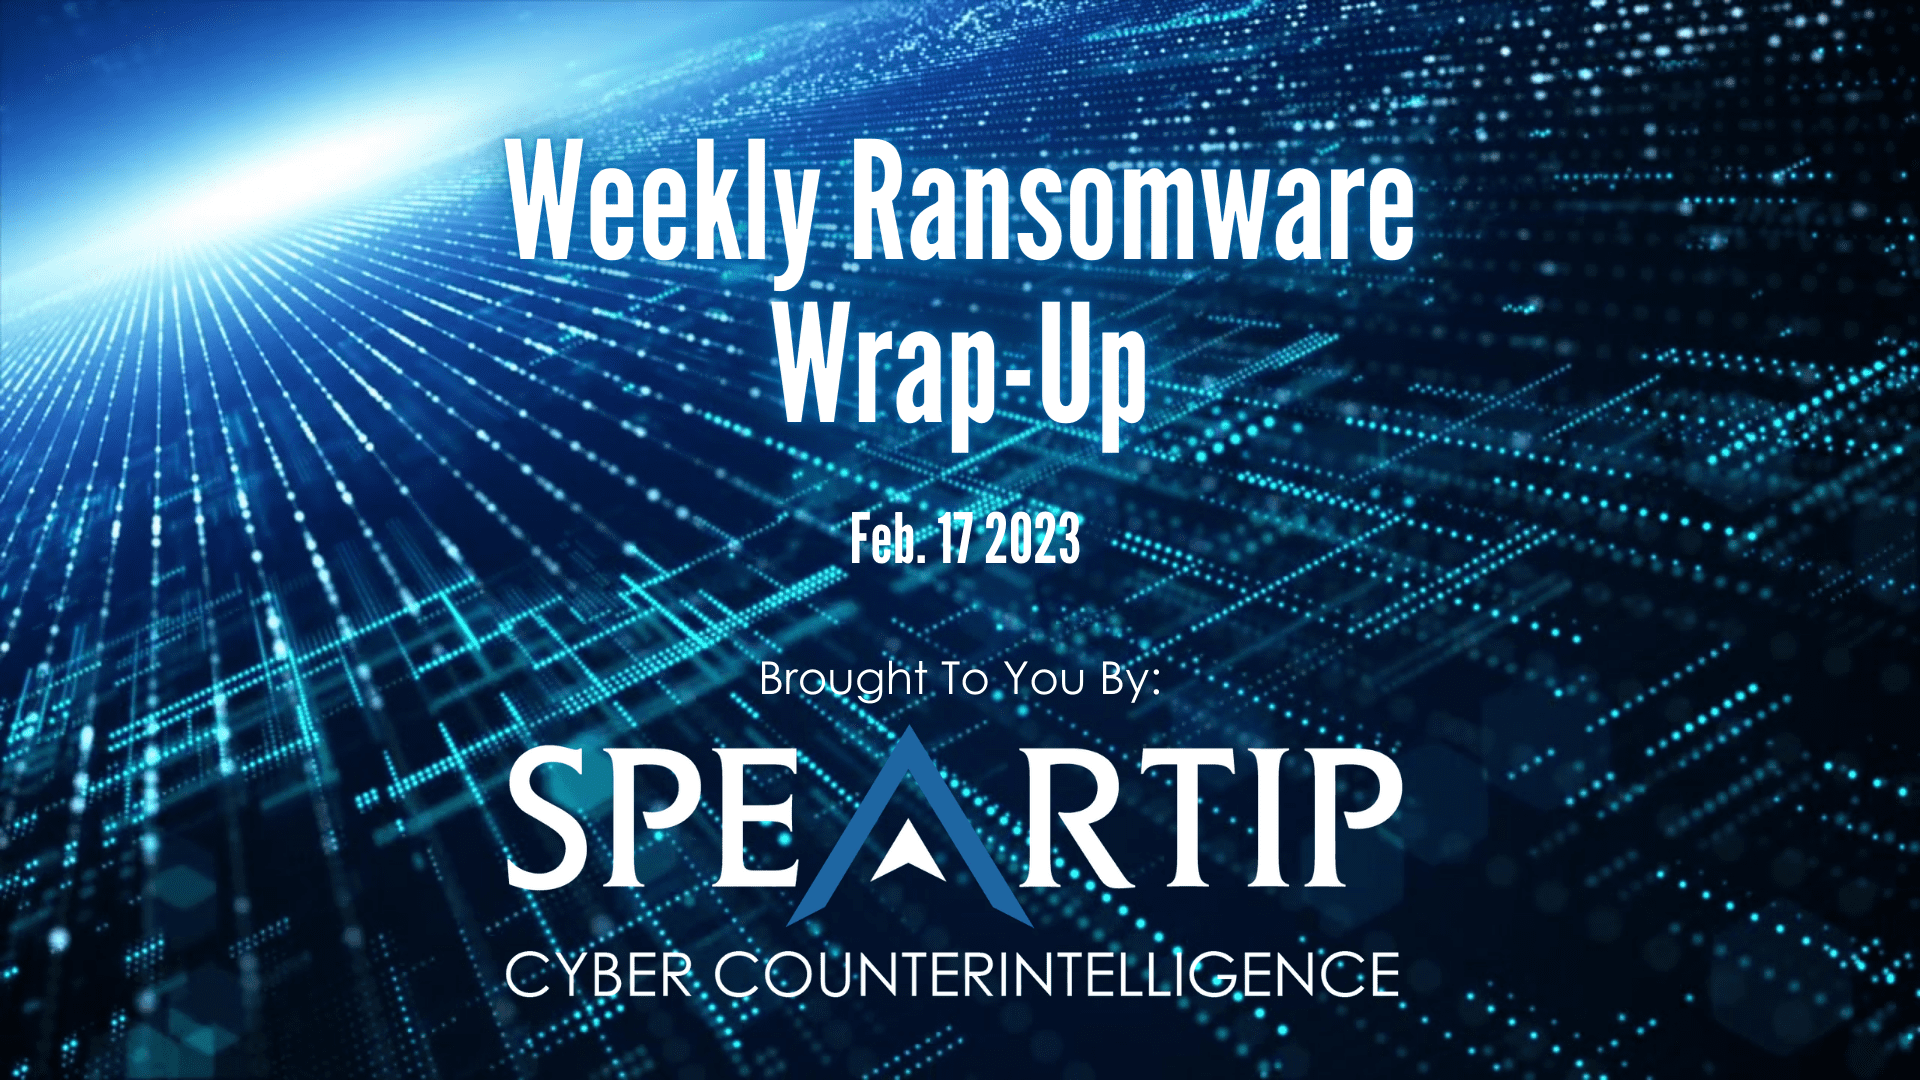 February 17, 2023 Ransomware Wrap-Up